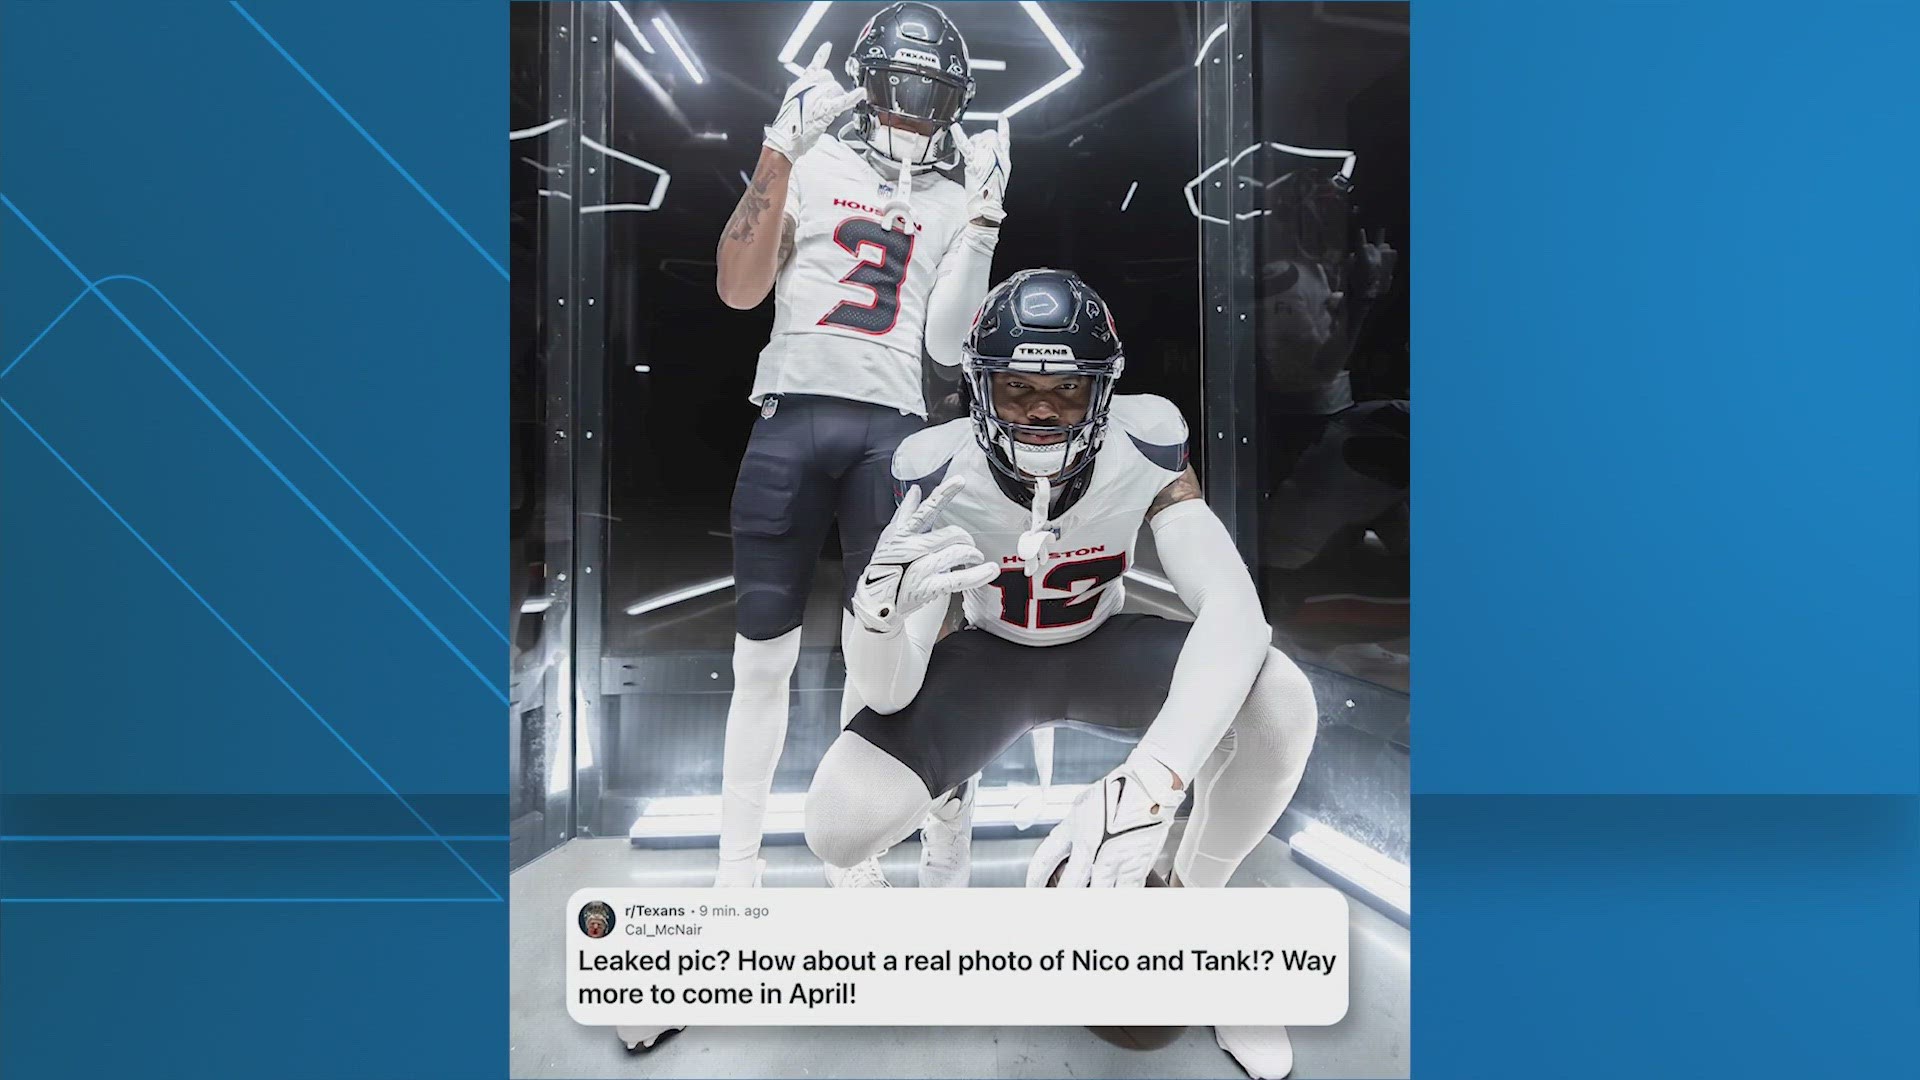 Team chairman and CEO, Cal McNair, posted a photo to Reddit showing Tank Dell and Nico Collins wearing the new jersey design.